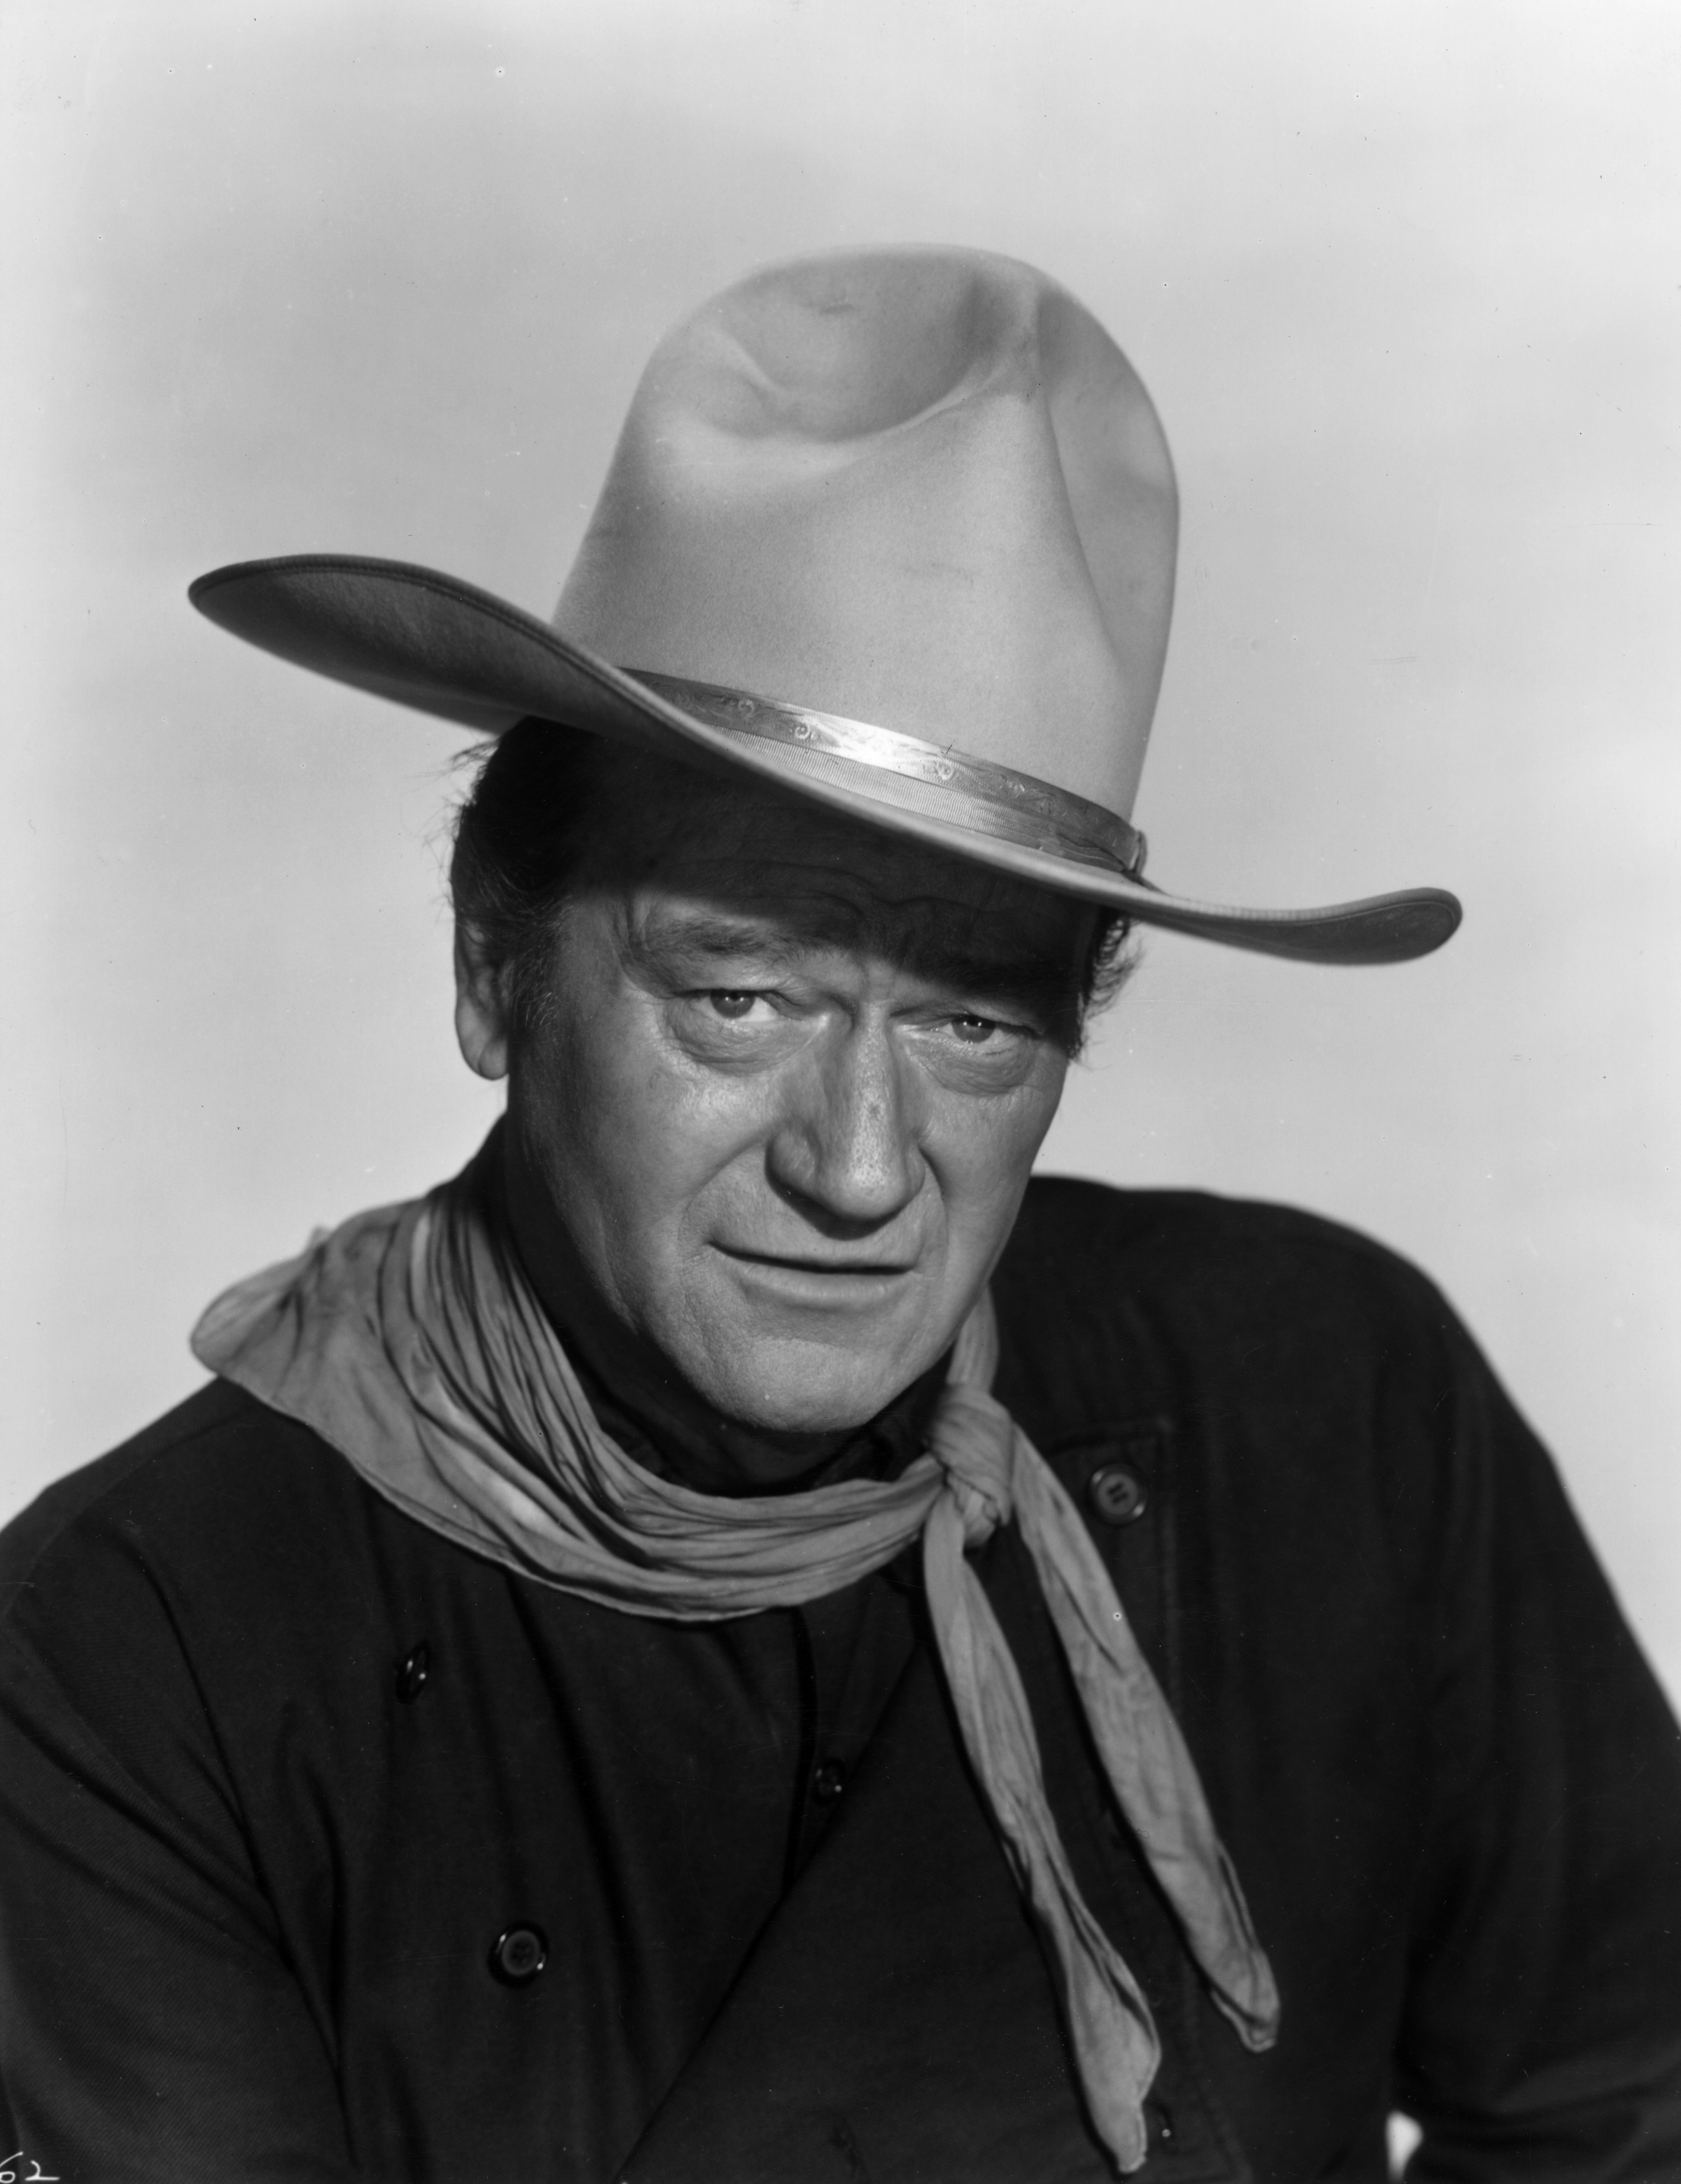 circa 1960:  Headshot portrait of American actor John Wayne (1907 - 1979) dressed as a cowboy with a bandana around his neck and a white cowboy hat on his head.  (Hulton Archive/Getty Images) (Hulton Archive&mdash;Getty Images)